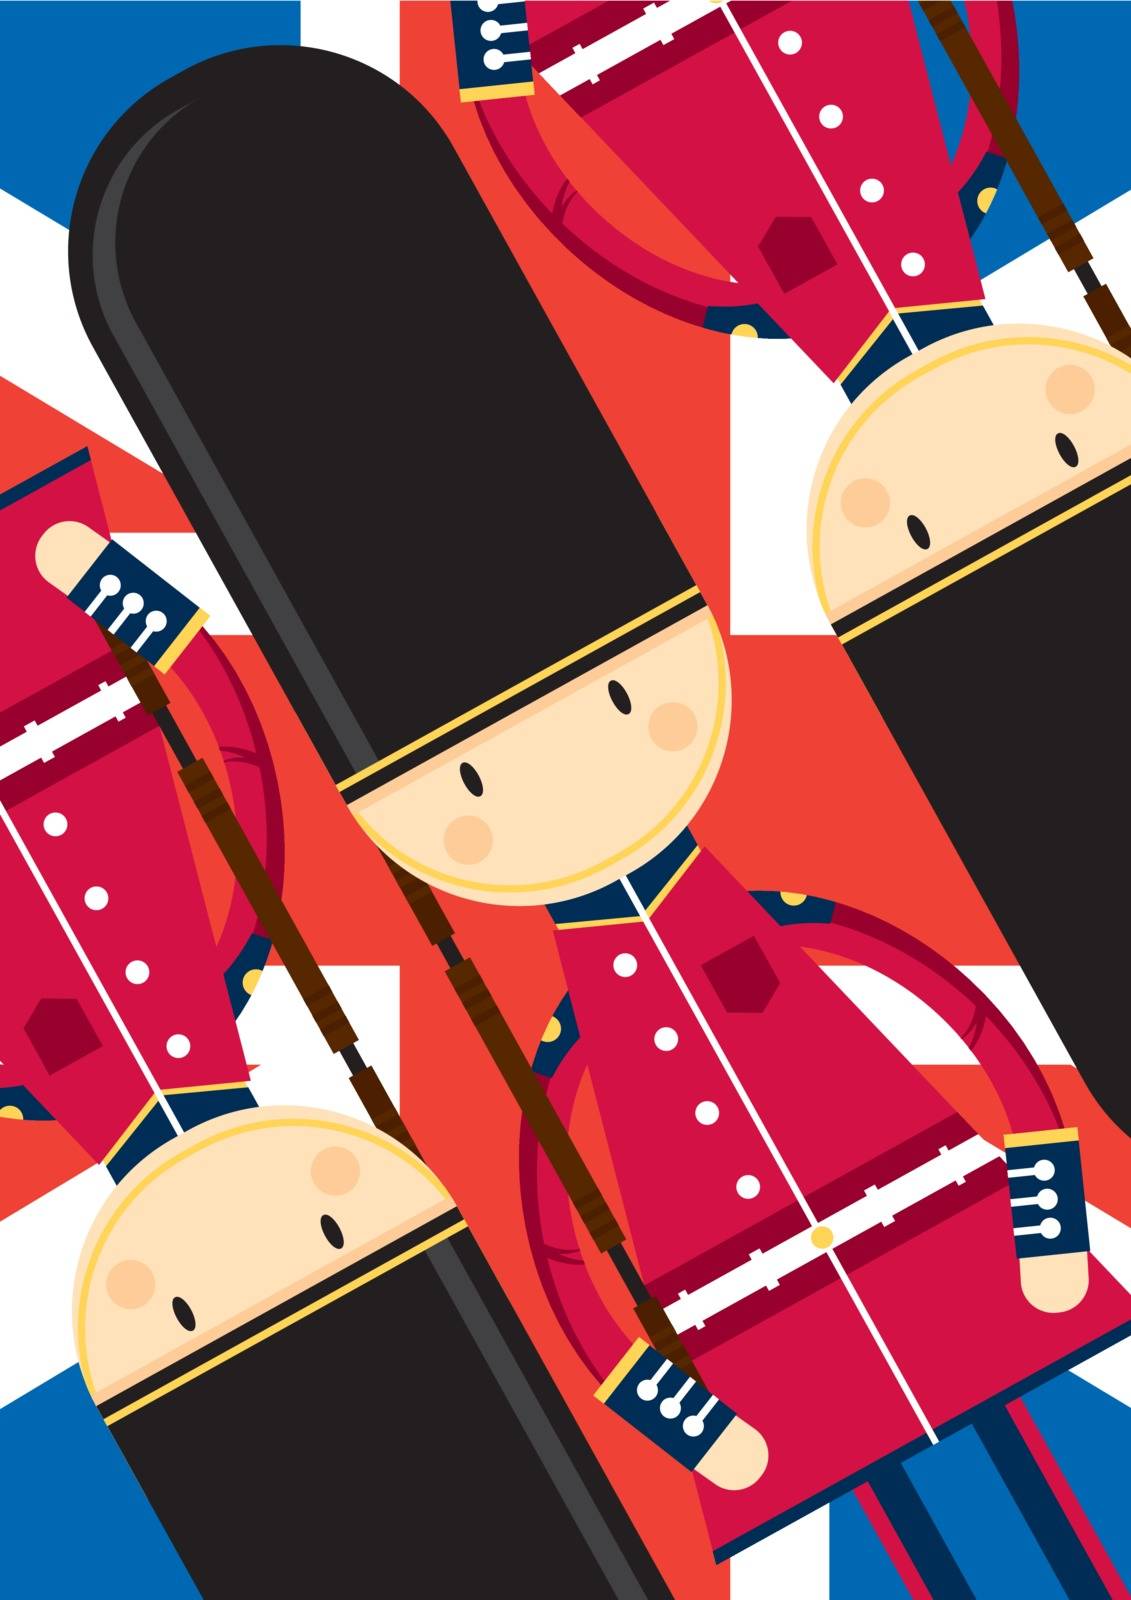 Cute Cartoon British Queen’s Palace Guard on a Union Jack Flag Background by Mark Murphy Creative